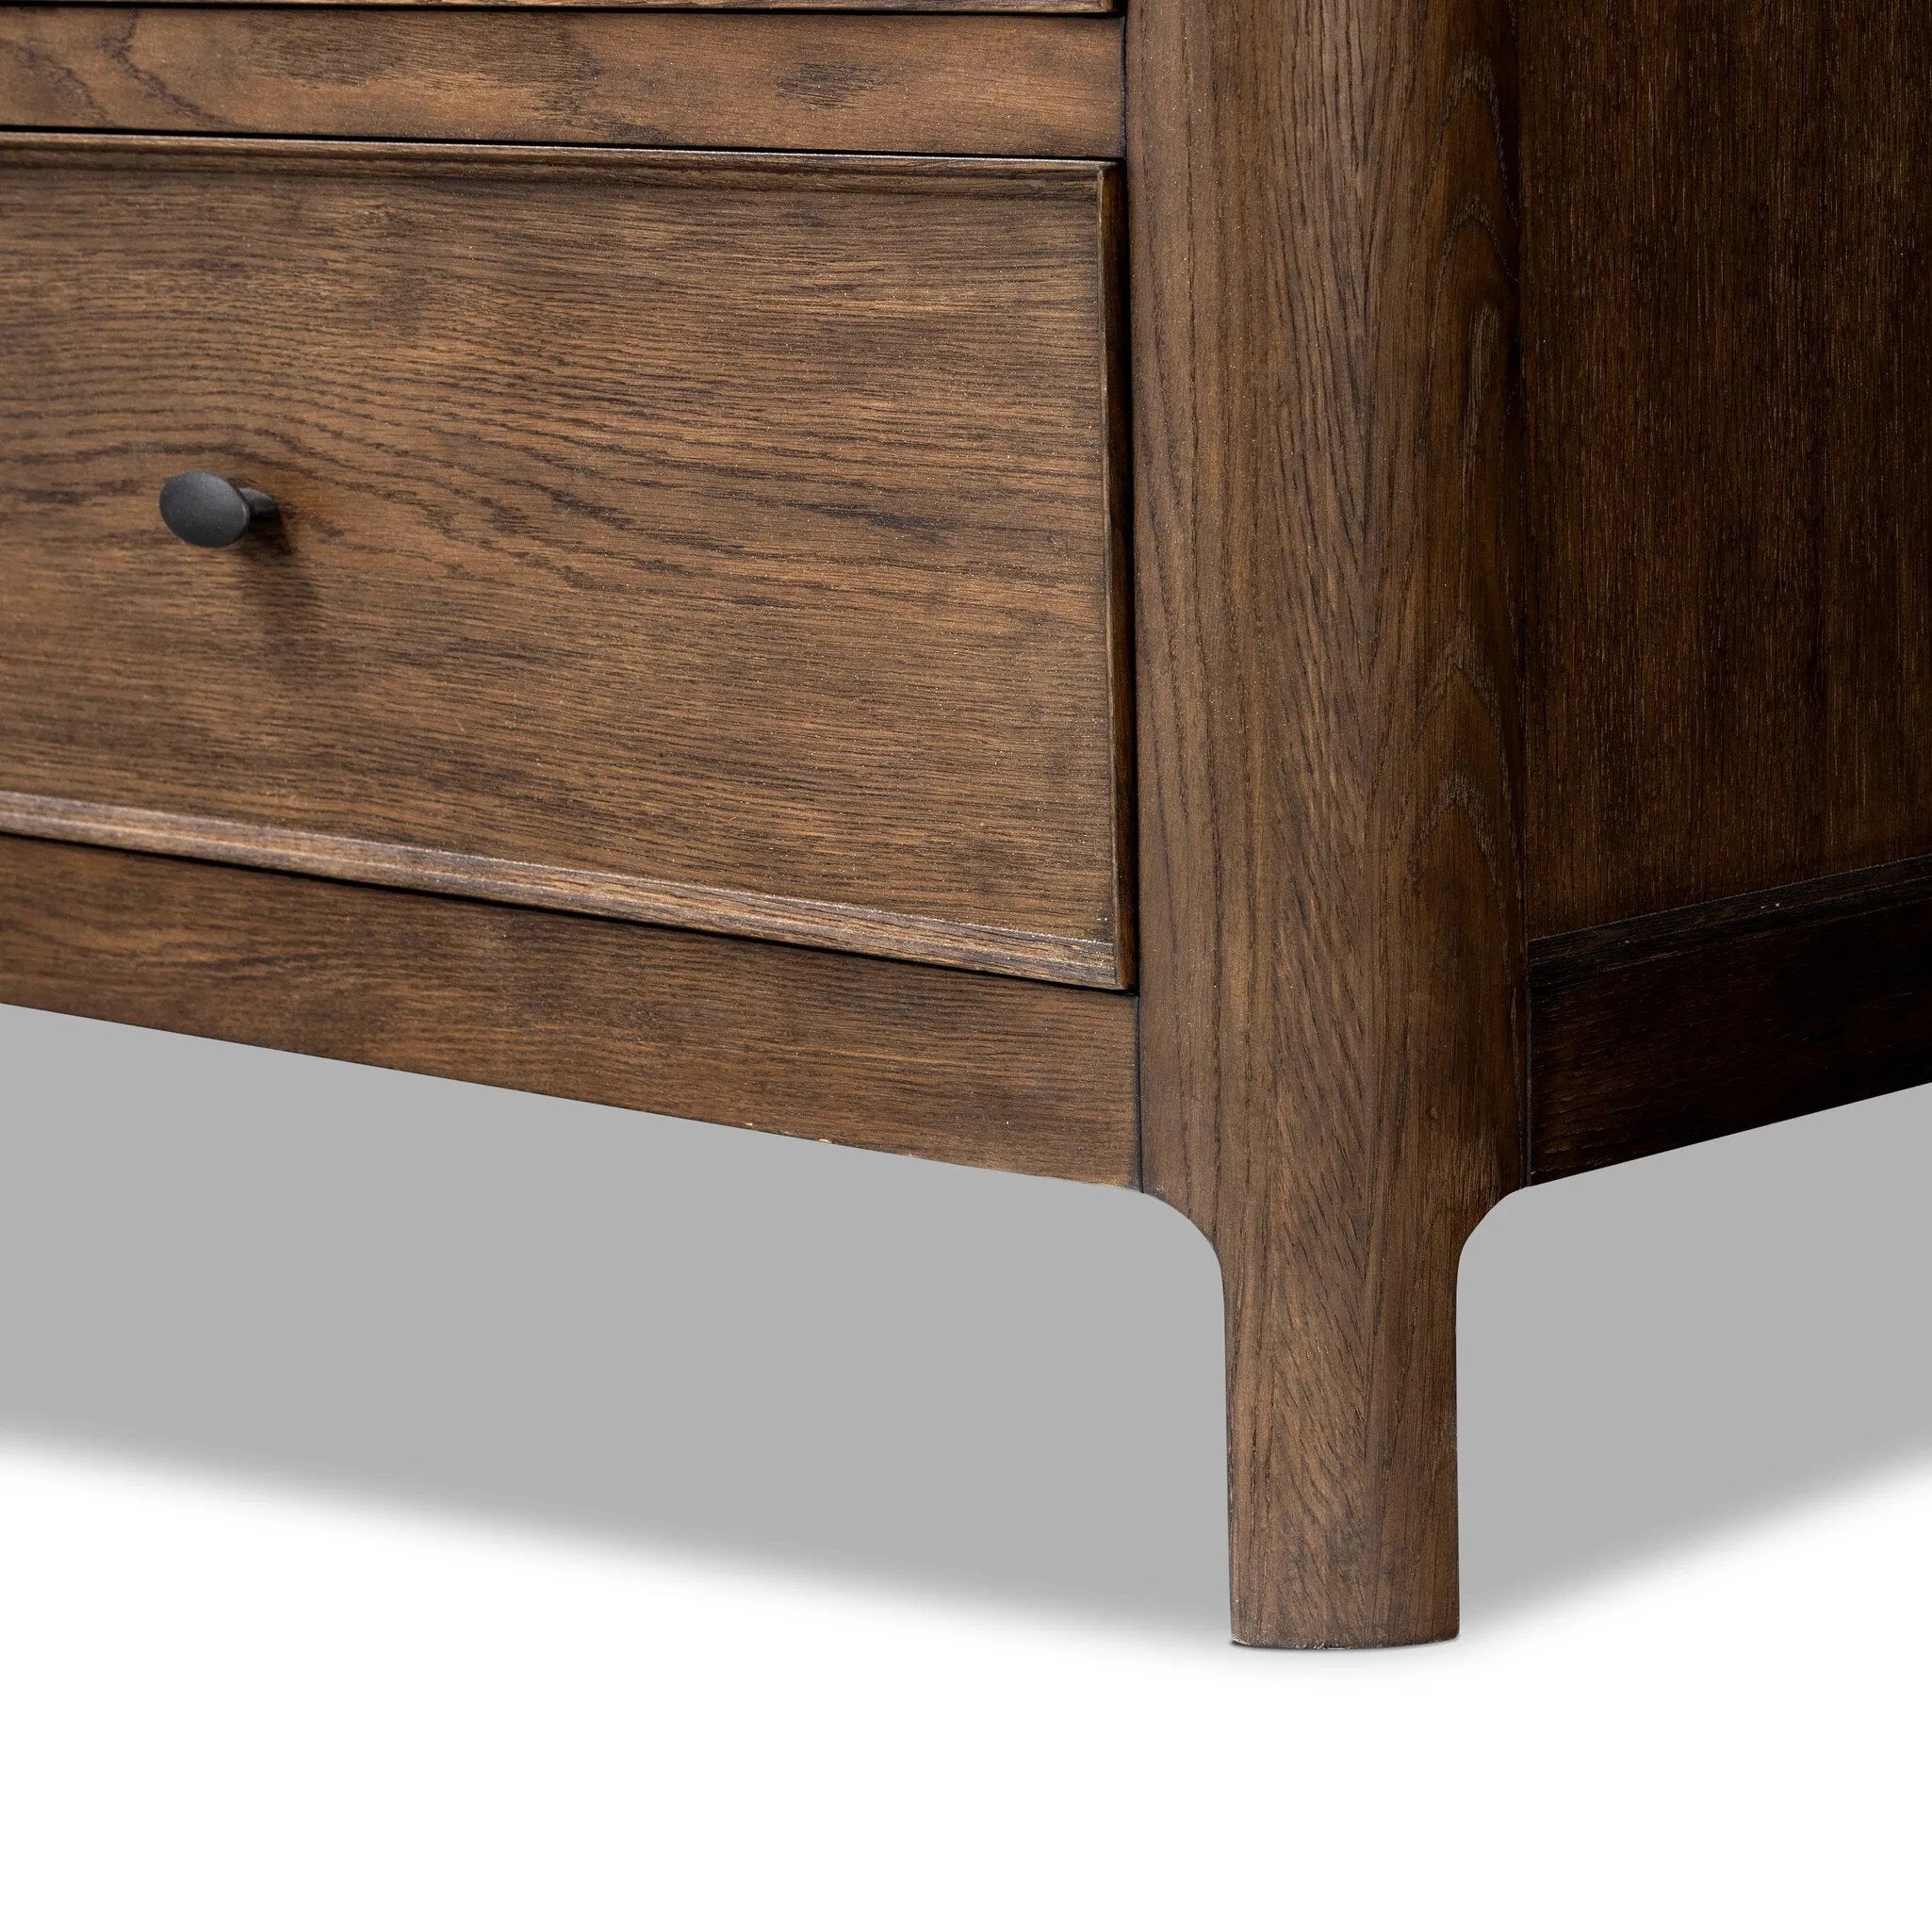 Like an heirloom dresser with three smaller drawers up top, this aged oak design has room for it all. Detailed with an overhang surface, carved edges top to bottom, angled legs and oval drawer pulls finished in dark gunmetal.Collection: Bolto Amethyst Home provides interior design, new home construction design consulting, vintage area rugs, and lighting in the Dallas metro area.